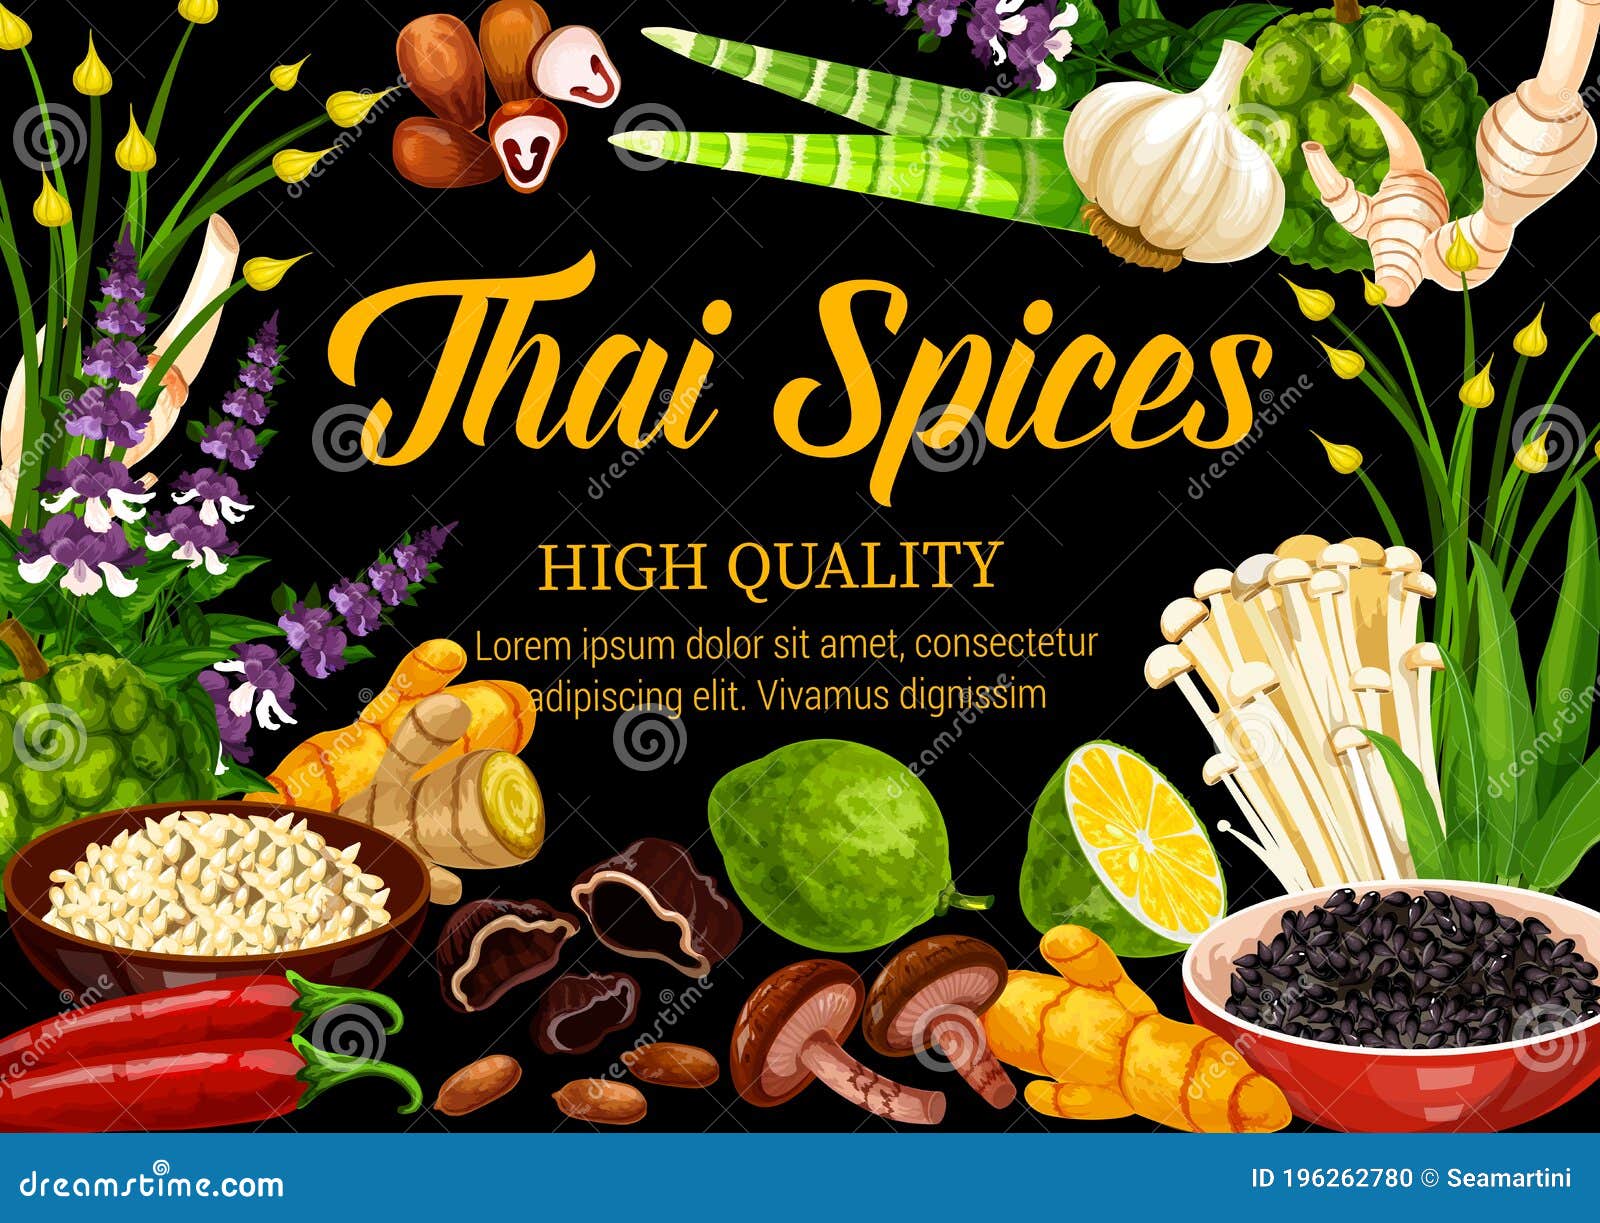 Cooking Thai Stock Illustrations – 20,2320 Cooking Thai Stock ...